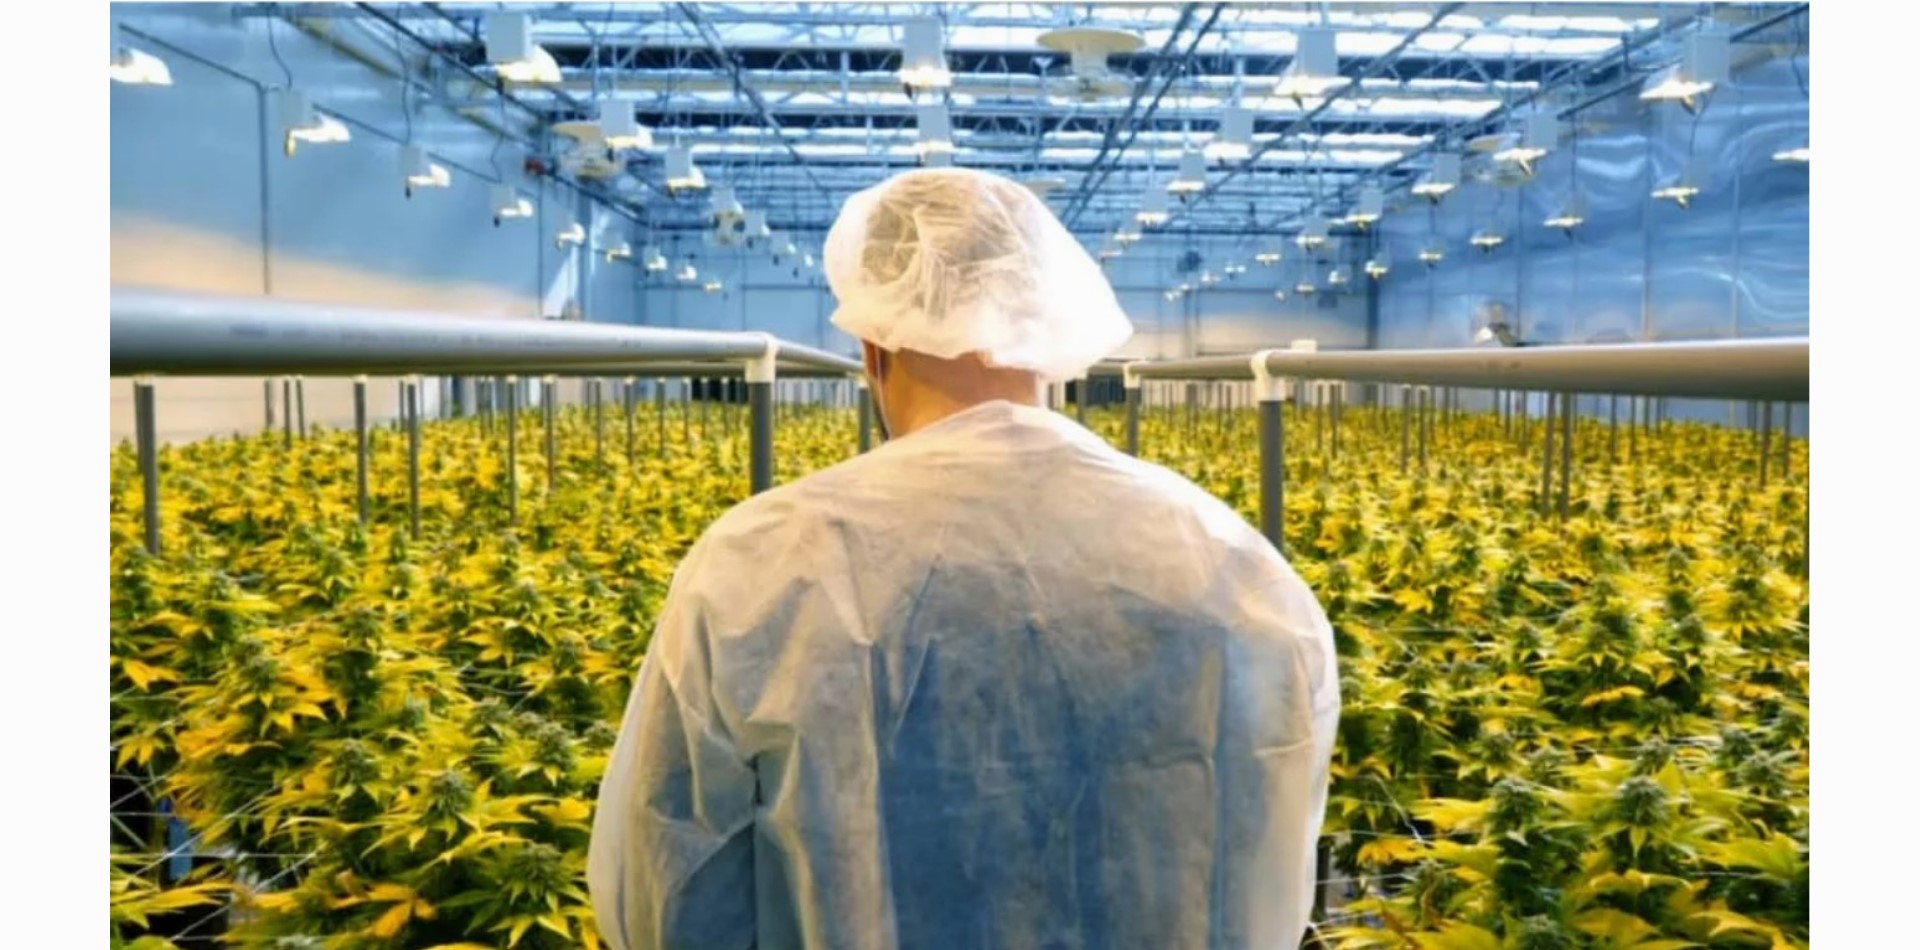 COVID-19 Is Leaving Its Mark On The Cannabis Industry, Insiders Say